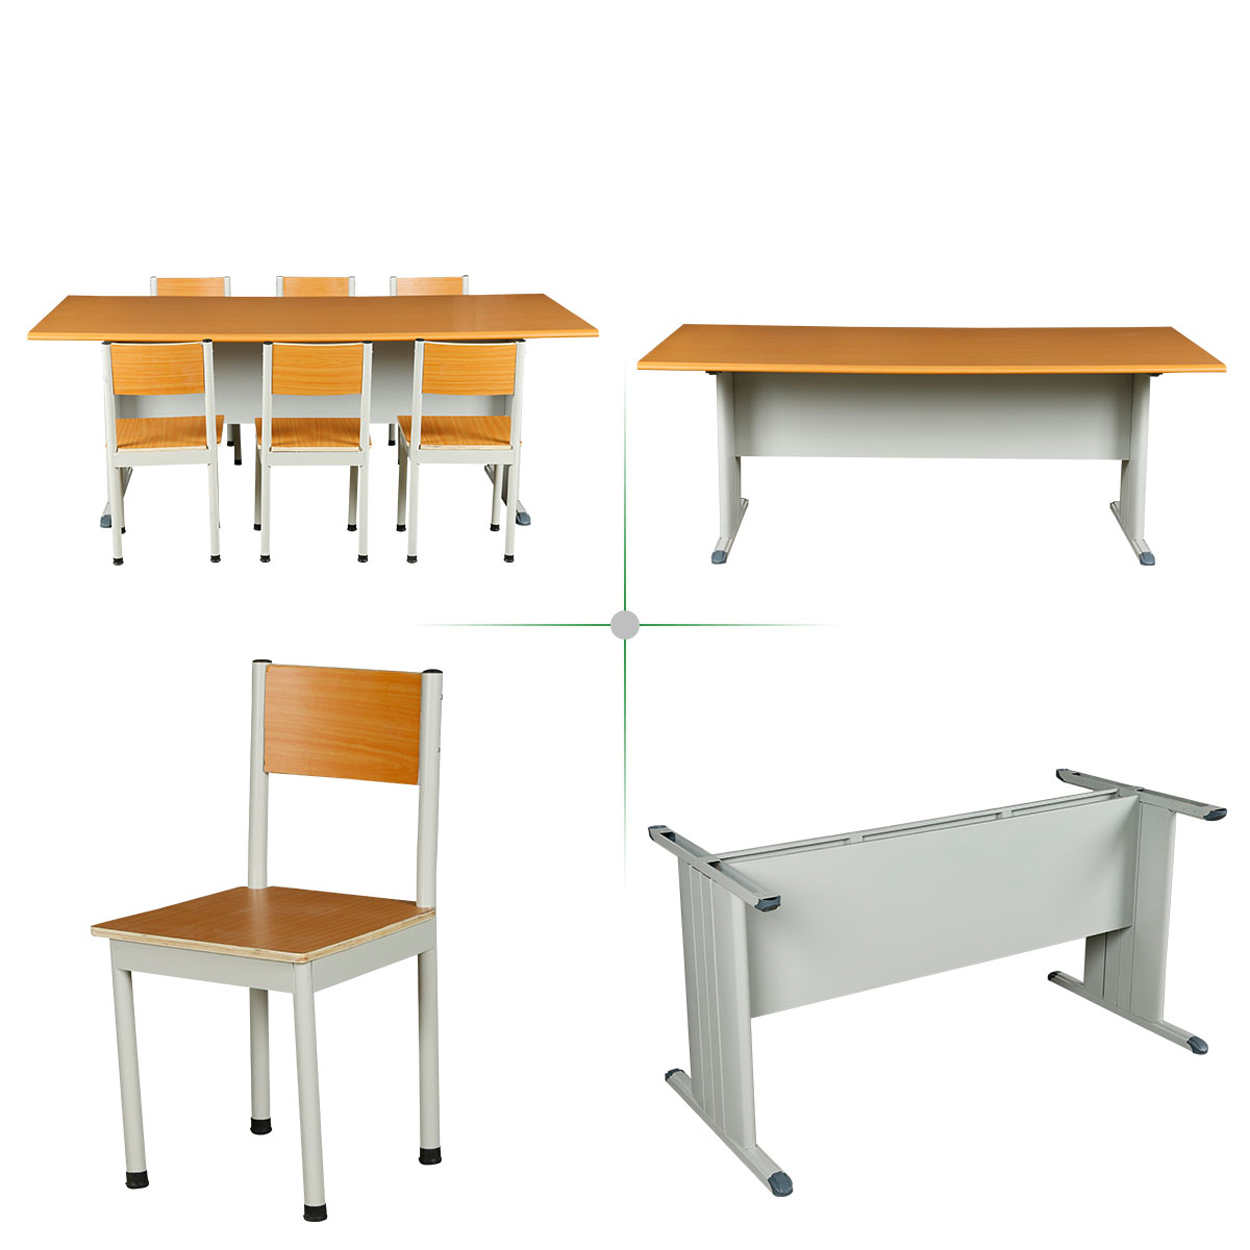 Steel Frame Carrels and Chairs for Library 1.jpg